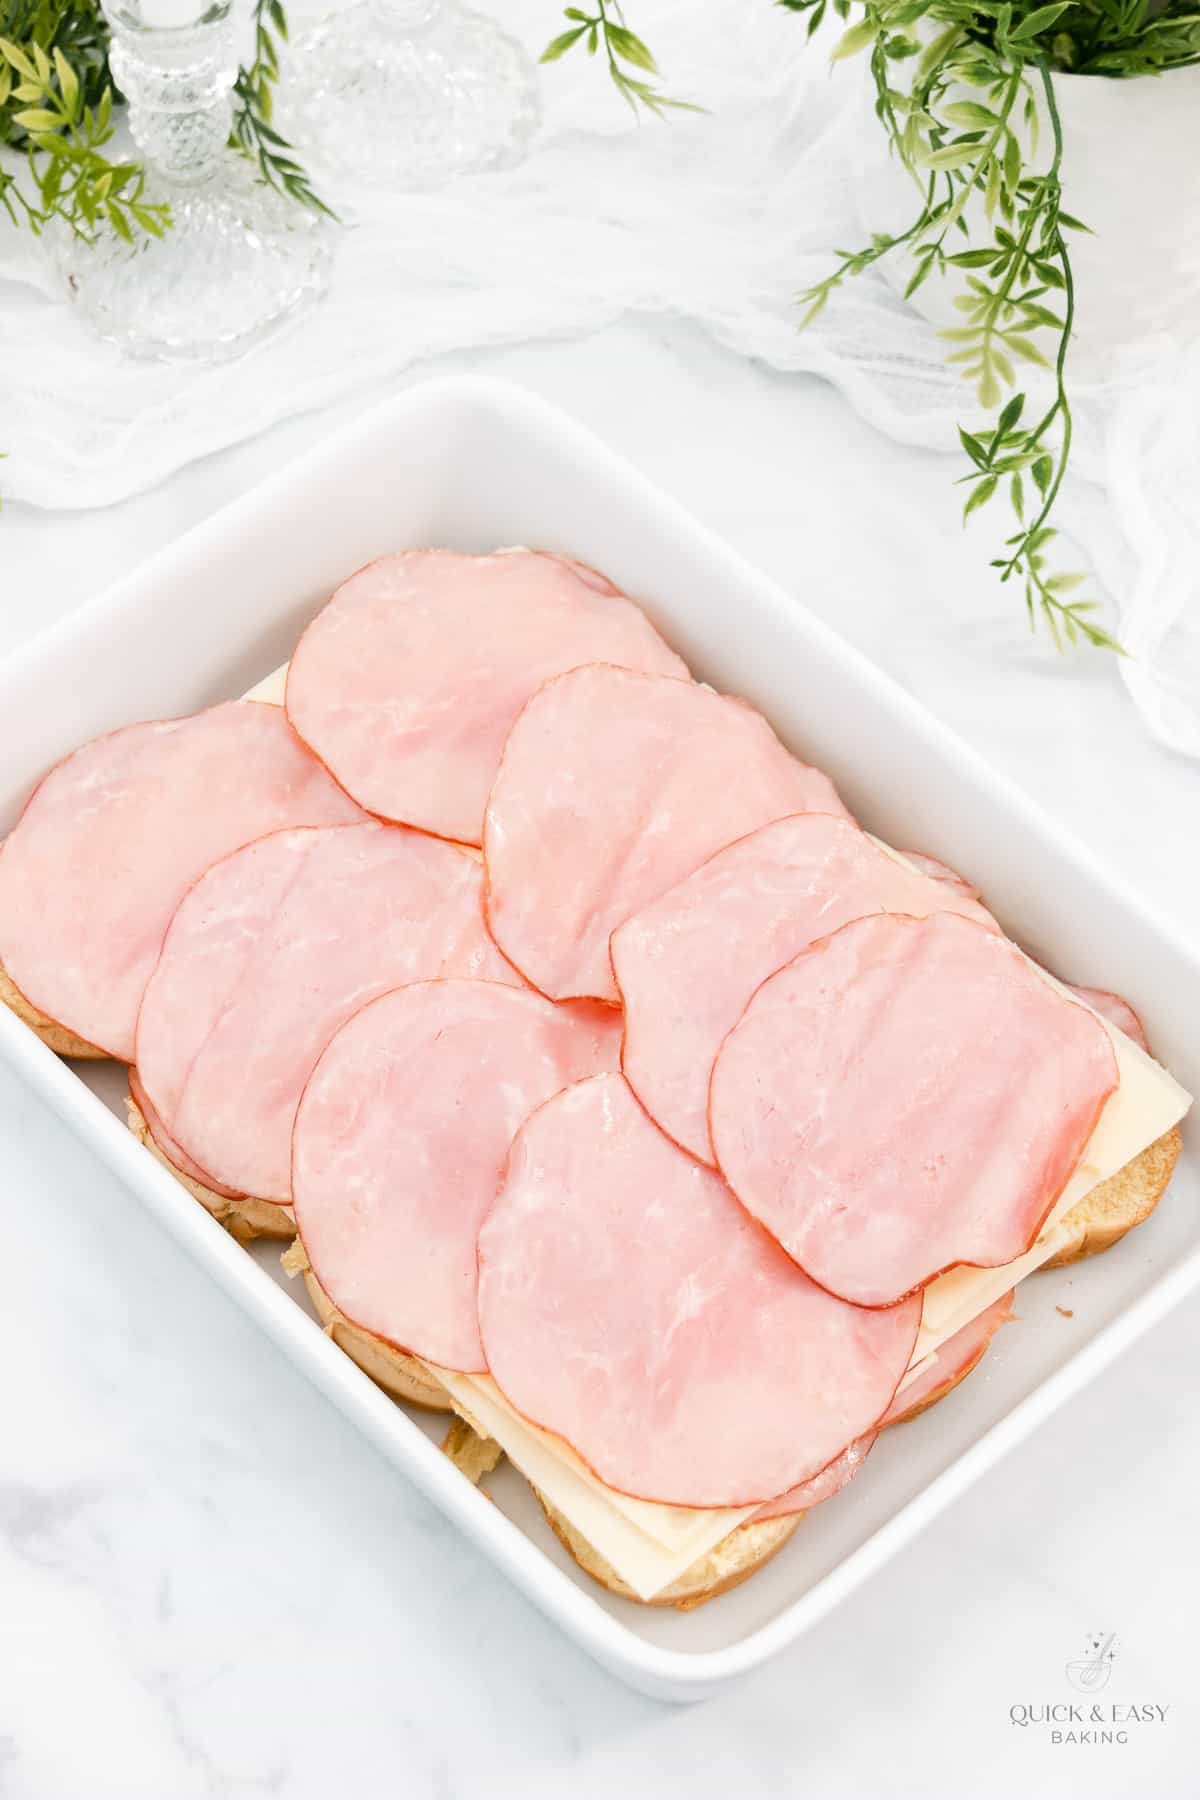 Rolls with ham and cheese in a casserole dish.